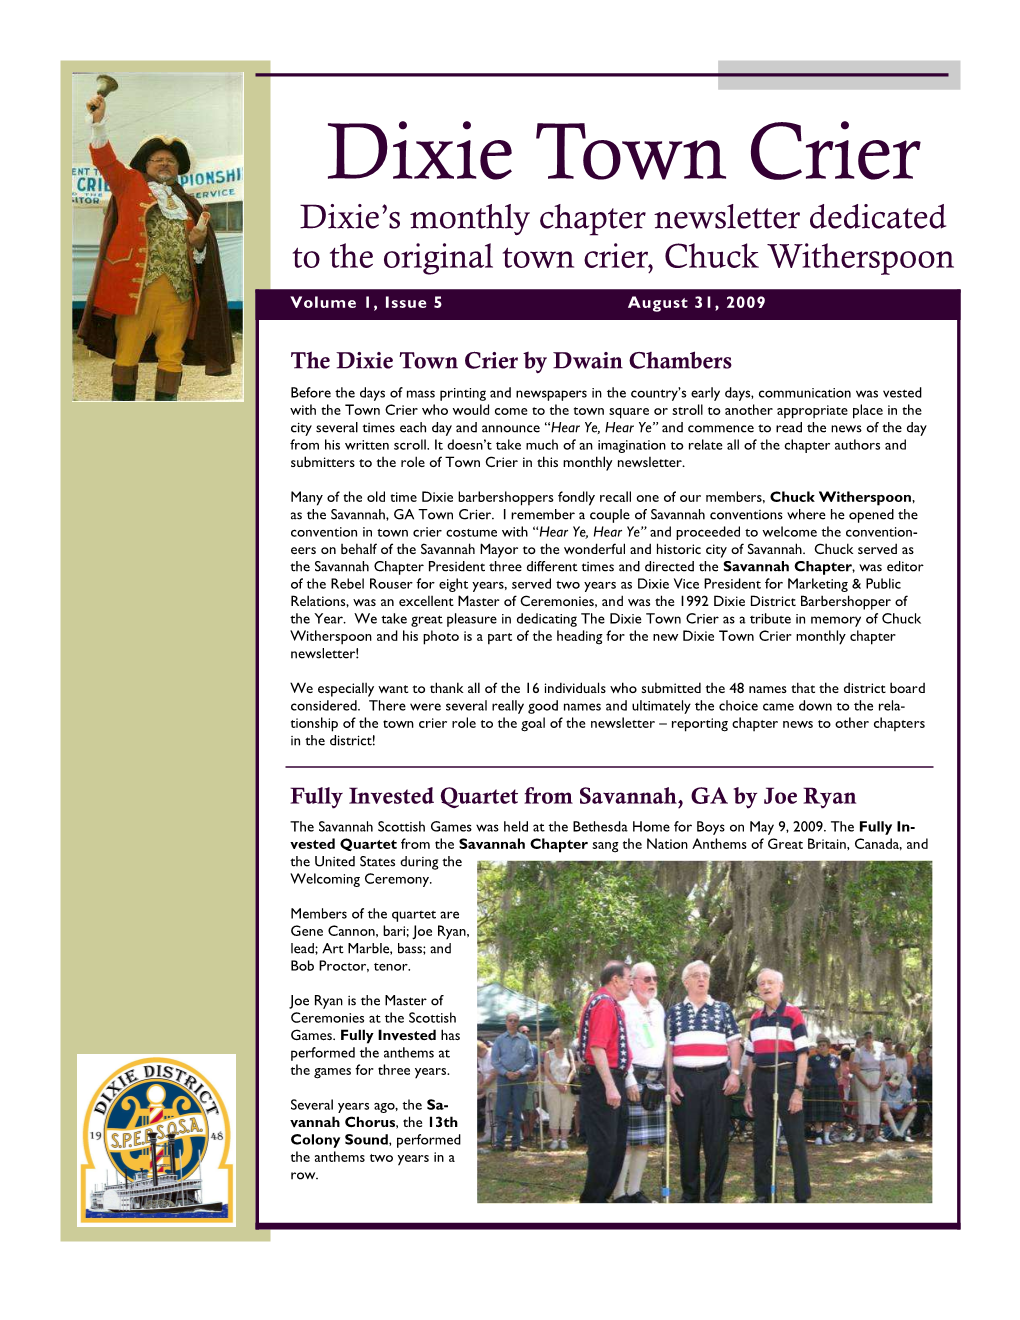 Dixie Town Crier Dixie’S Monthly Chapter Newsletter Dedicated to the Original Town Crier, Chuck Witherspoon